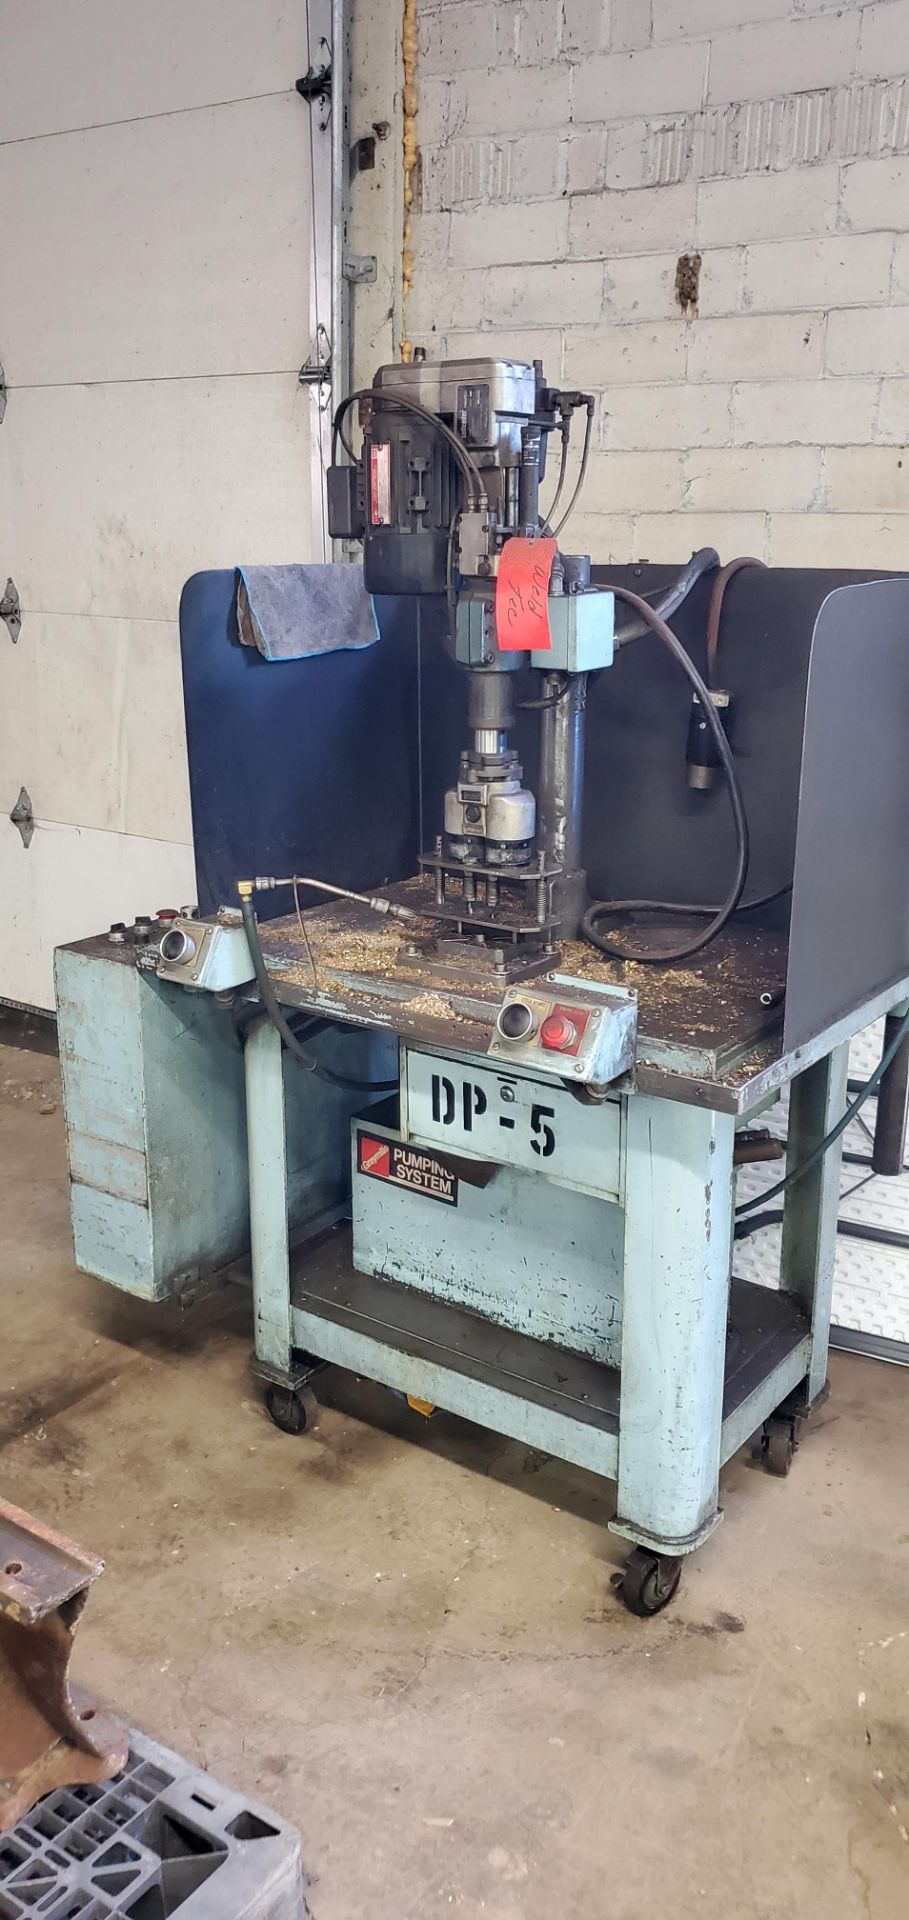 Dadson Model 401850 Drill Press, s/n 083195 with 2-head Drilling Fixture Selfeeder Newtric 3.15" - Image 3 of 3